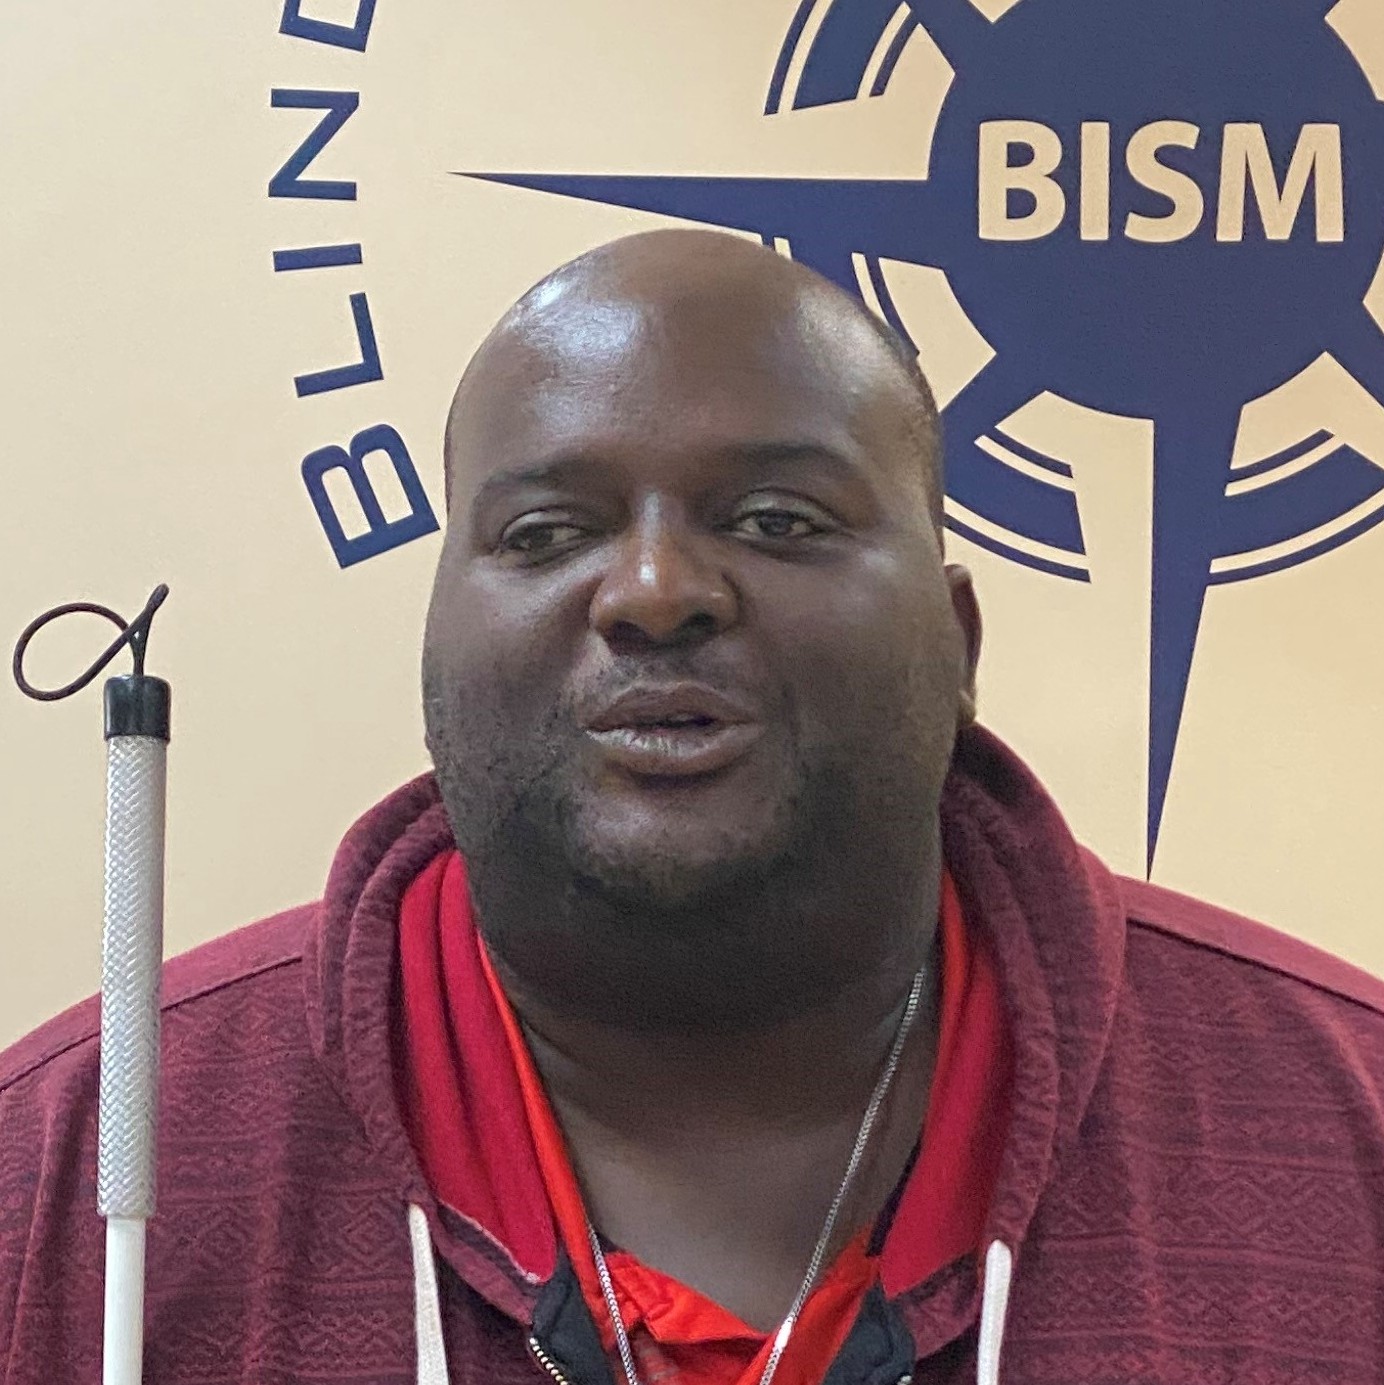 Photo of Antonio Williams standing in front of the BISM logo. Antonio looks confident and friendly.